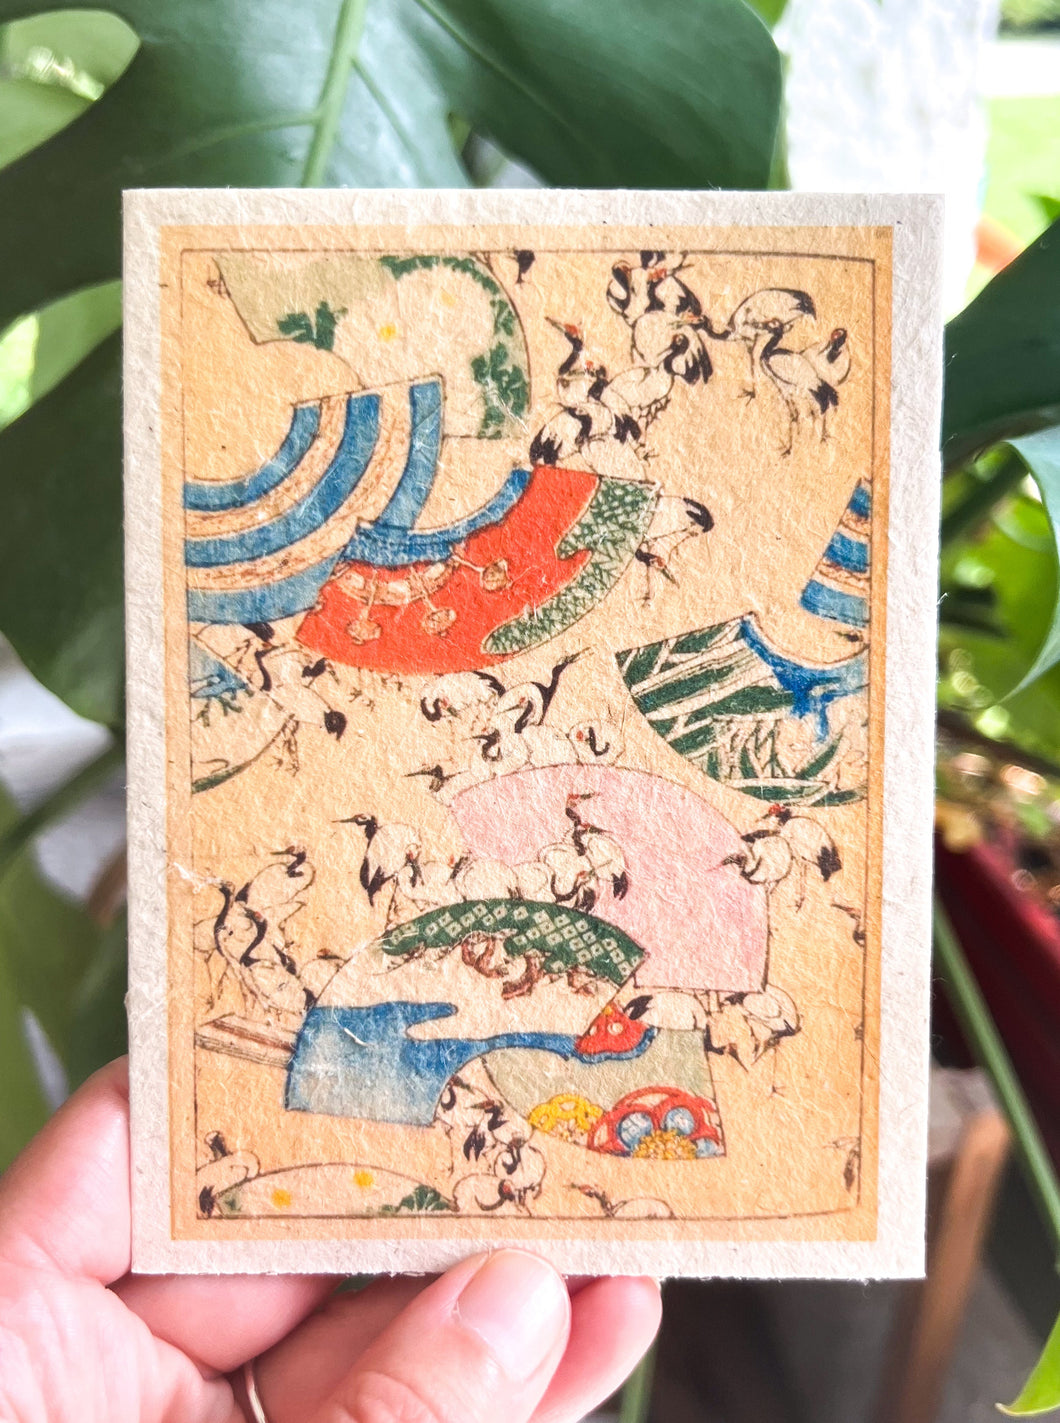 Japanese Plantable Seed Card || Zero Waste || Supports Women || Eco-friendly || J31